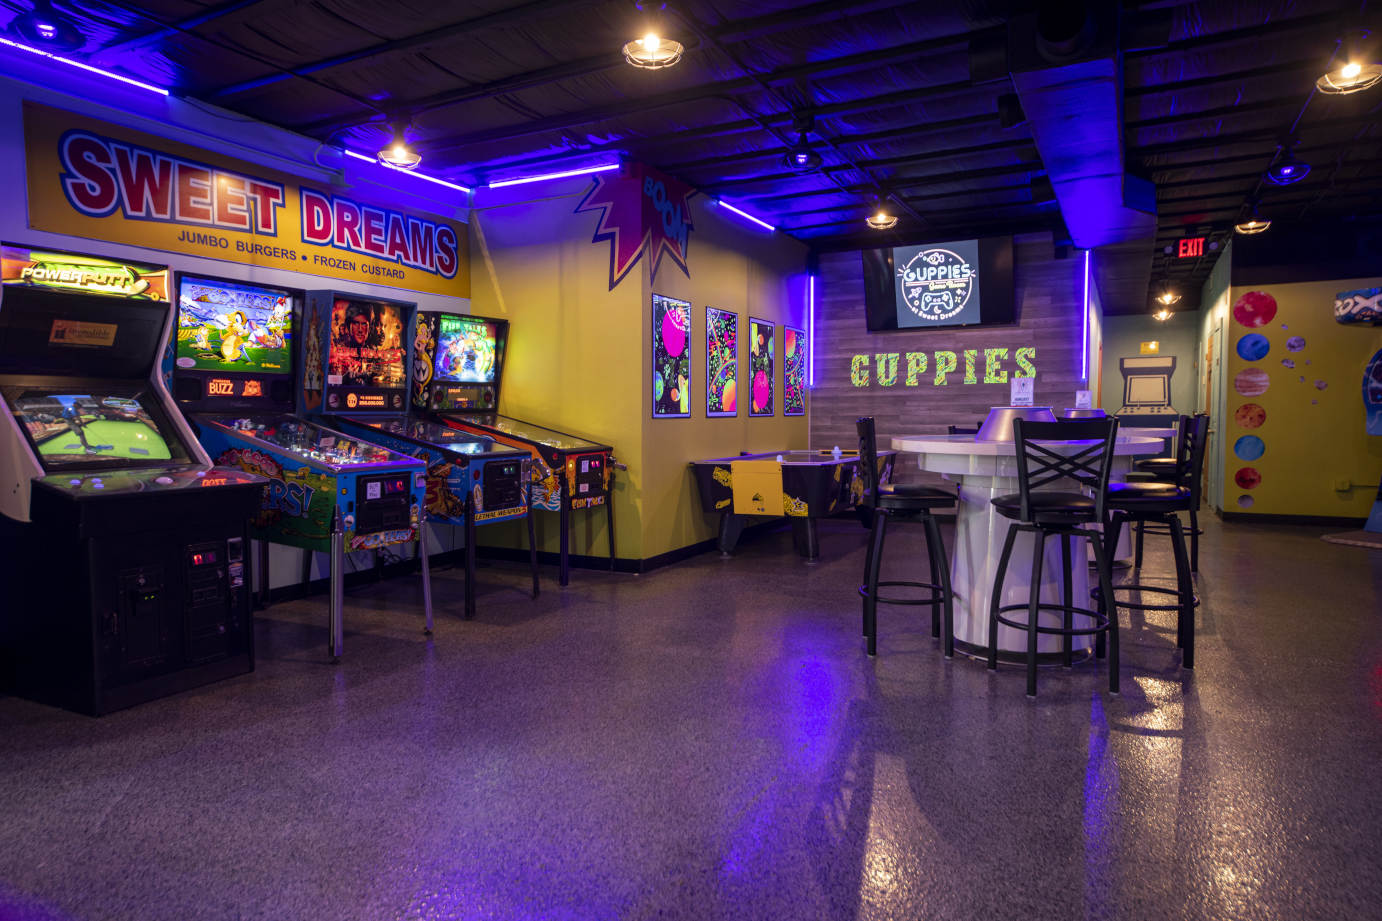 Interior, arcade games, table soccer, and seating